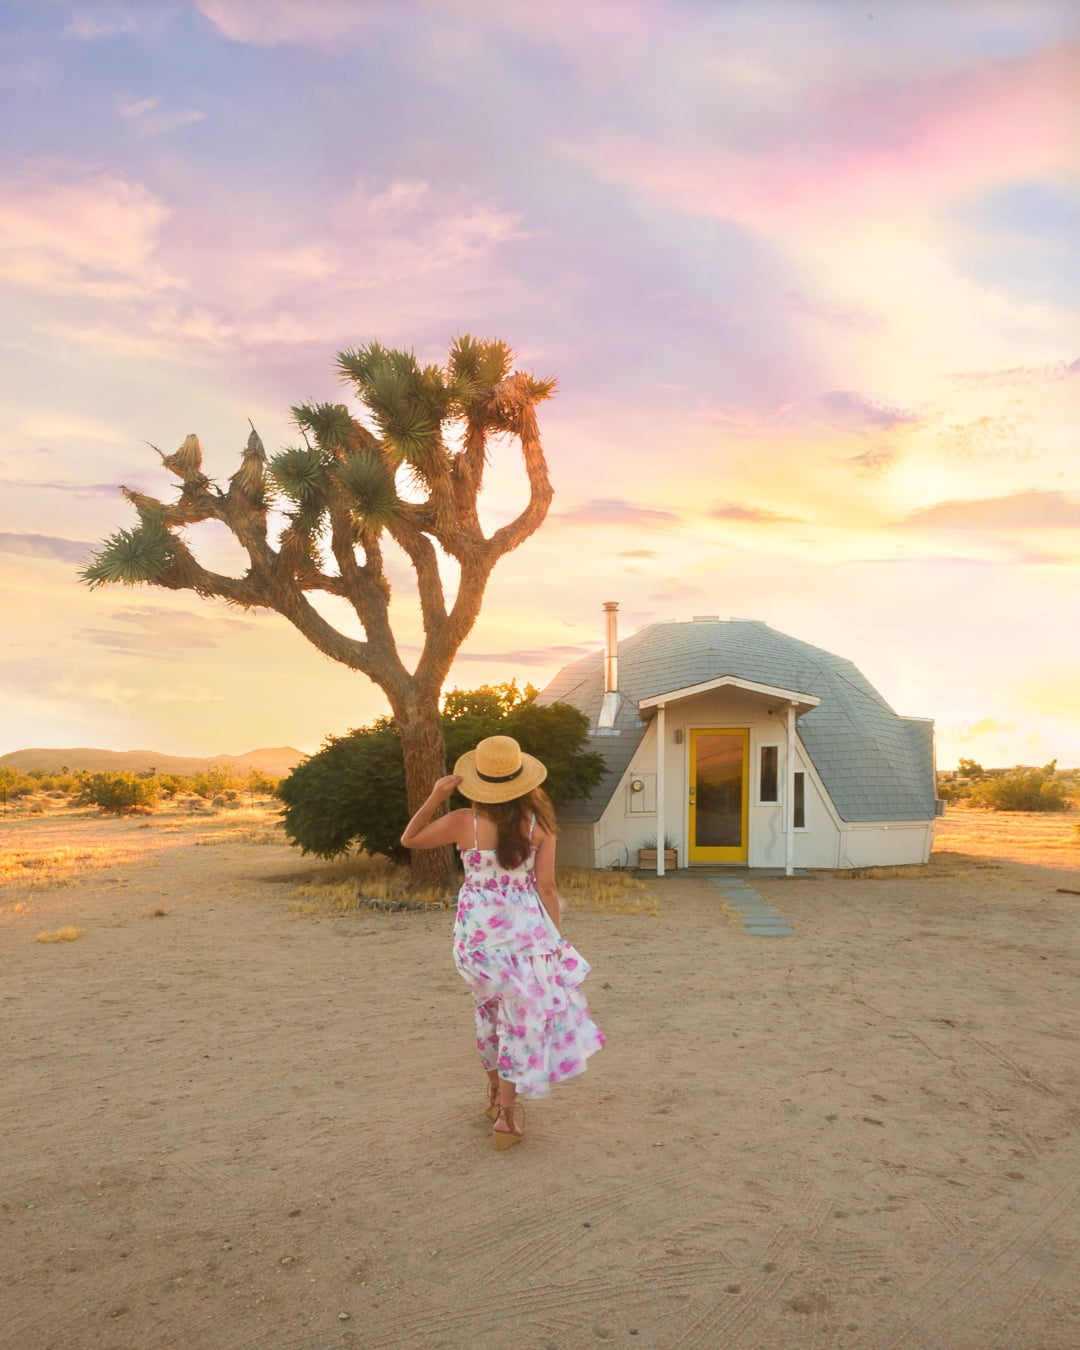 Dome in the Desert at sunset. Photography by Jaz Wanderlust.